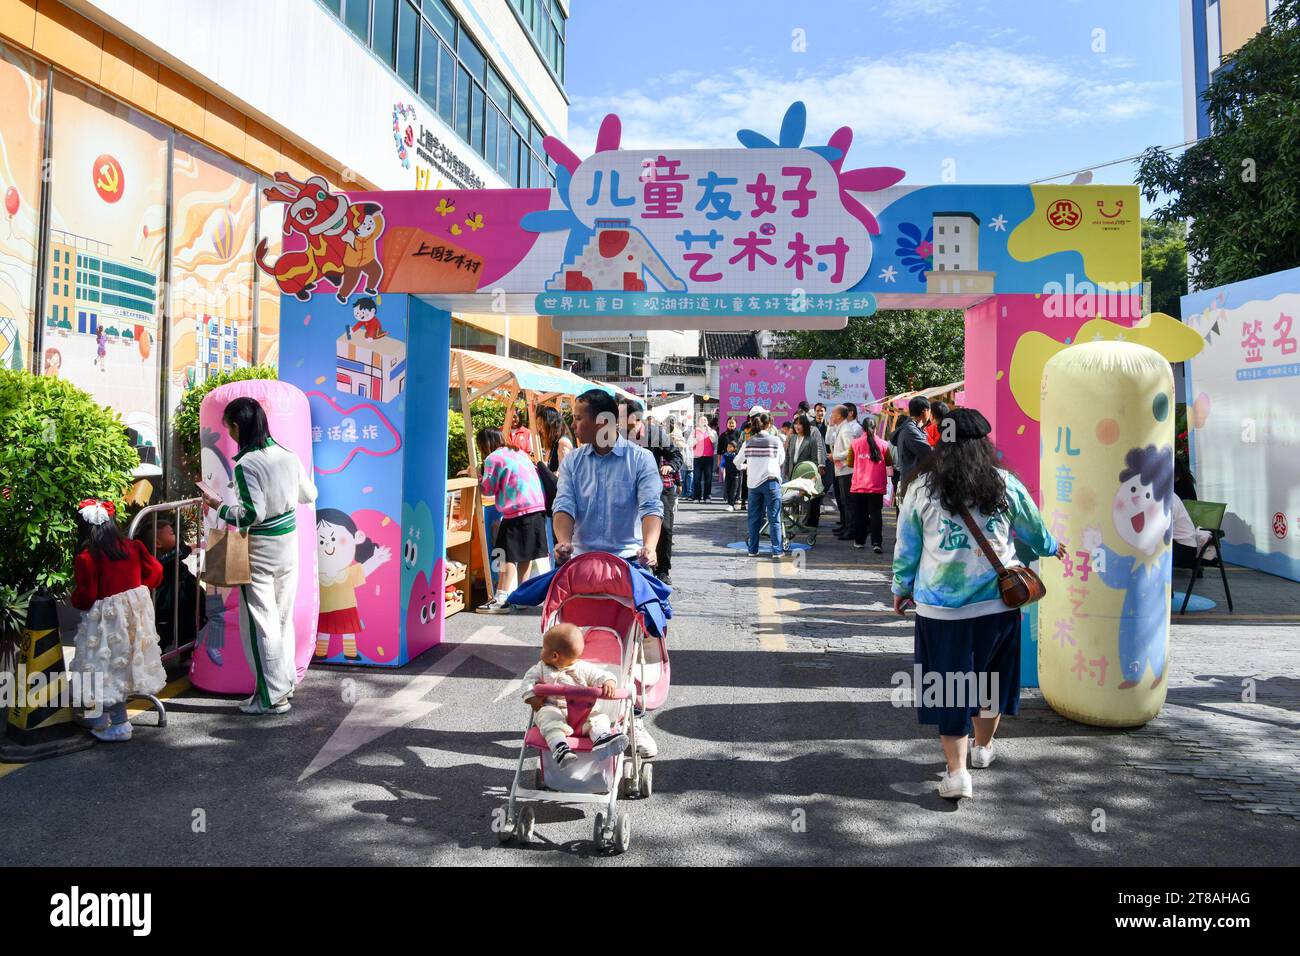 (231119) -- SHENZHEN, Nov. 19, 2023 (Xinhua) -- This photo taken on Nov. 19, 2023 shows a children's public benifit market in Shangwei Village of Longhua District in Shenzhen, south China's Guangdong Province. Shenzhen launched China's first guidelines for building a child-friendly city eight years ago. Since then the city has been rolling out a spate of measures spearheading the construction towards this aim. Statistics shows that by October of 2023, 452 city-level child-friendly bases and over 1,260 children's parks of various categories have been set up to gradually improve children's ac Stock Photo